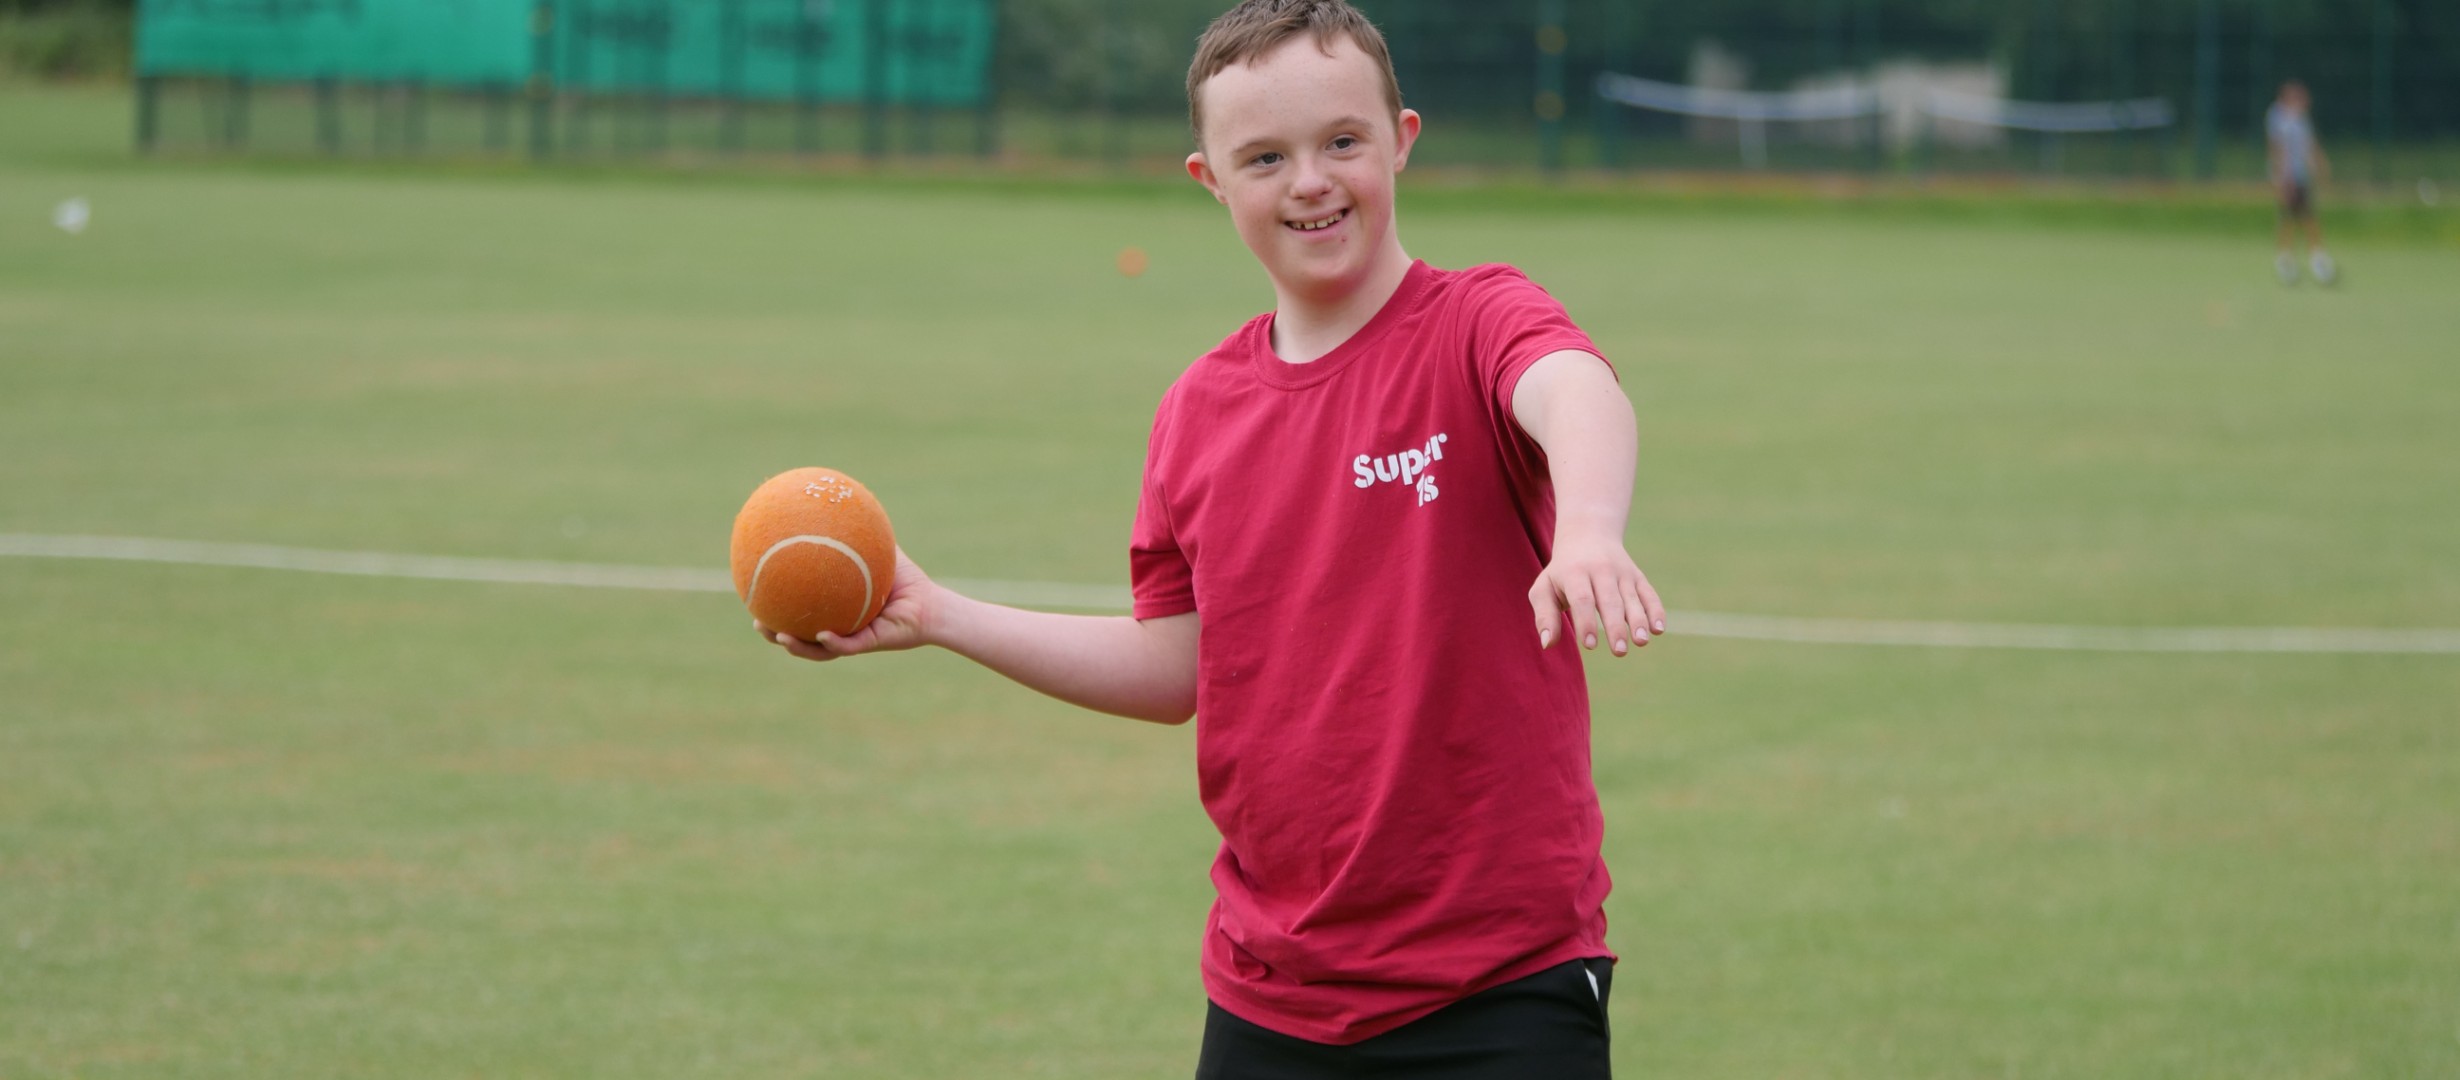 Young person holding orange cricket ball ready to bowl. 